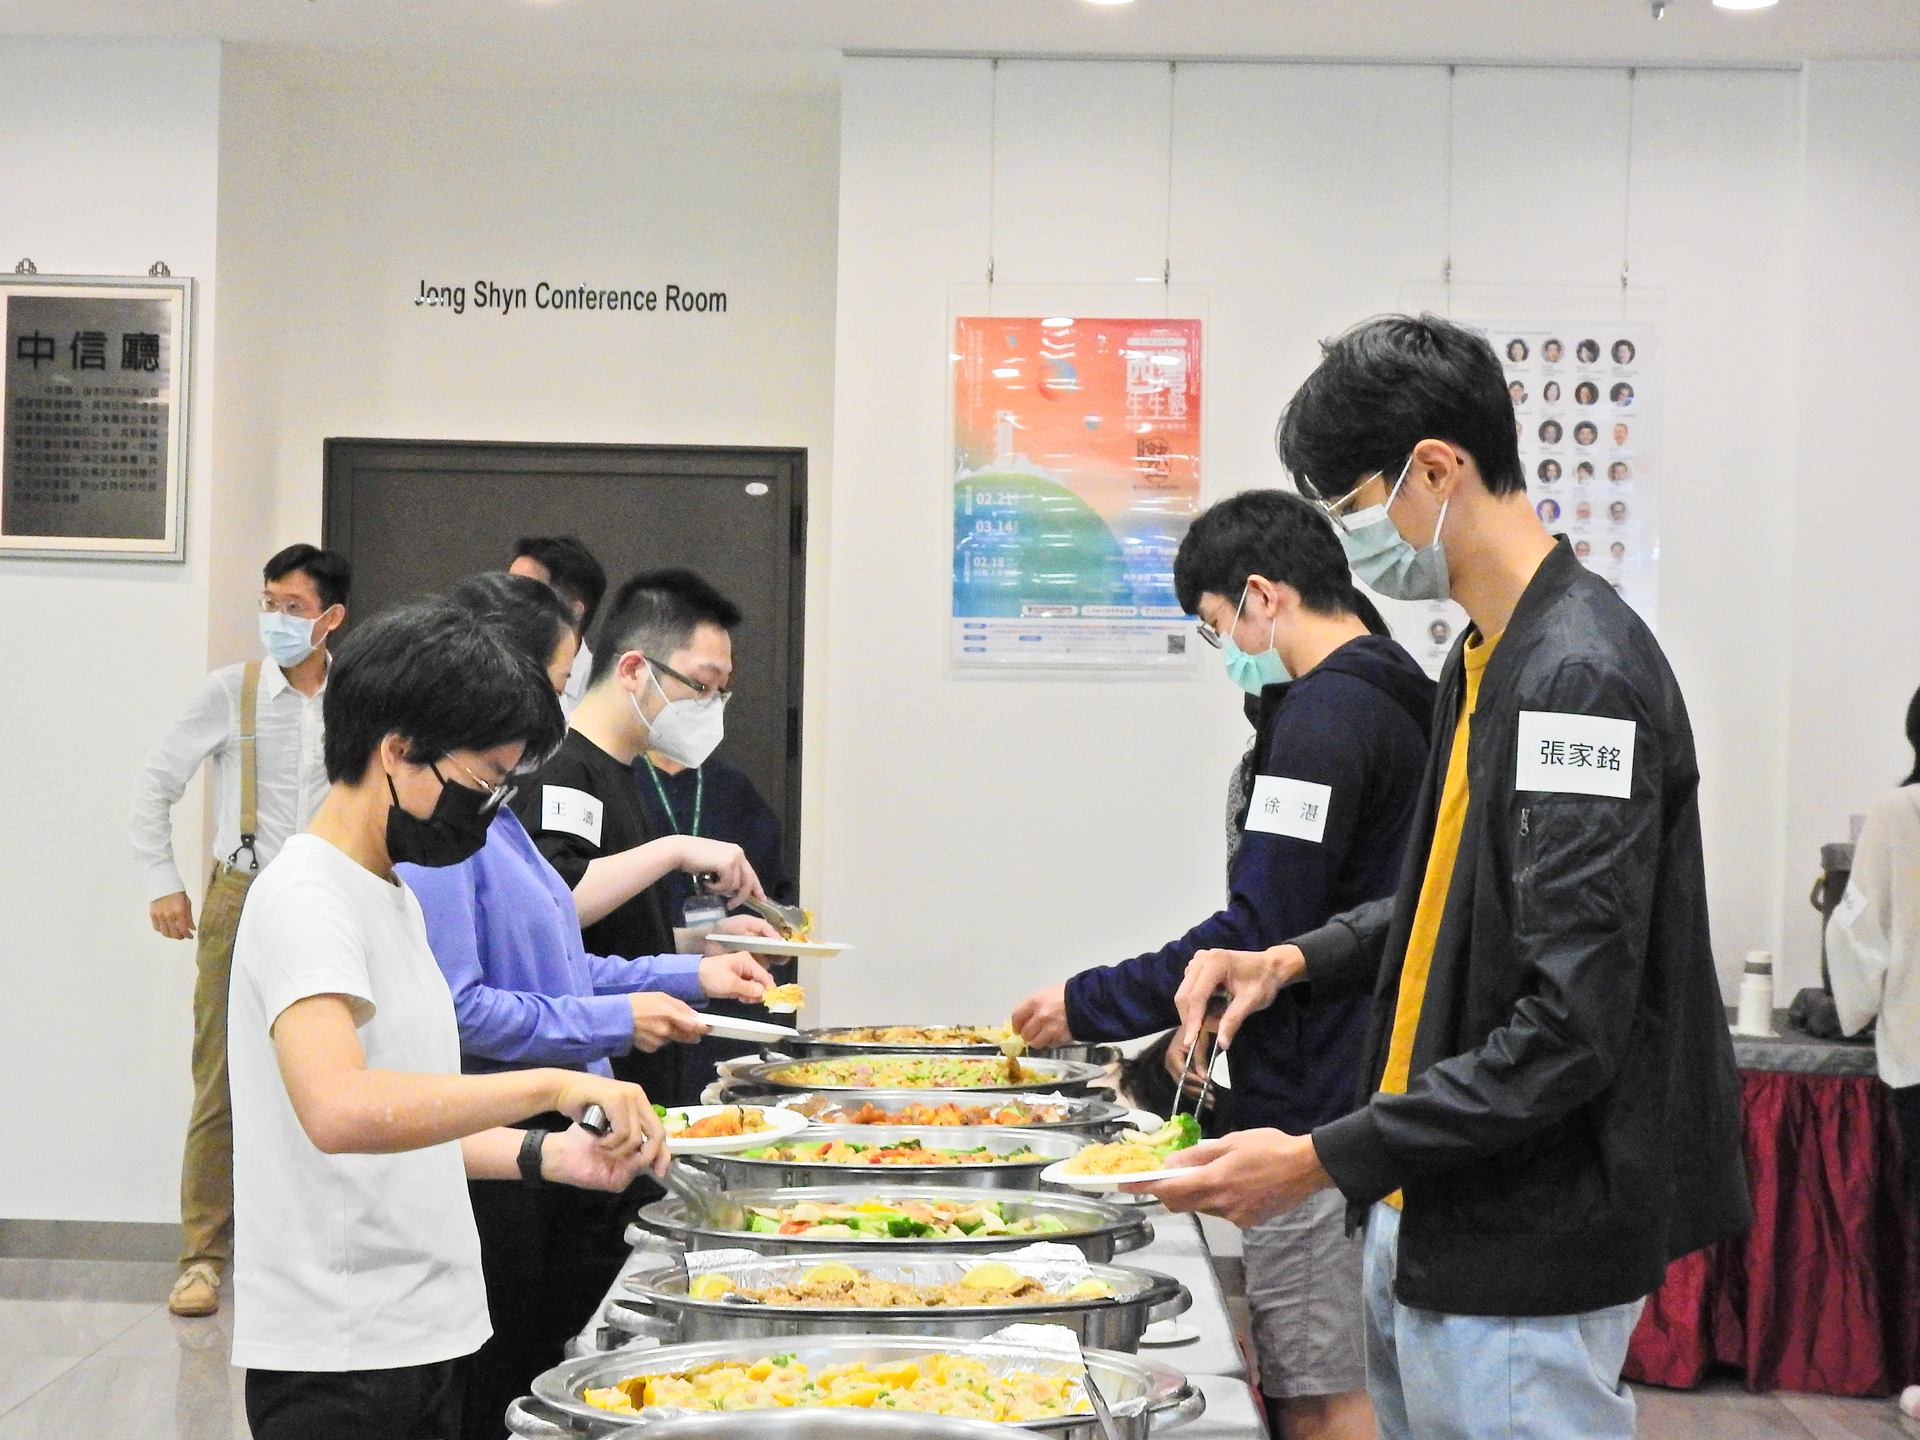 Teachers and students enjoy a delicious meal